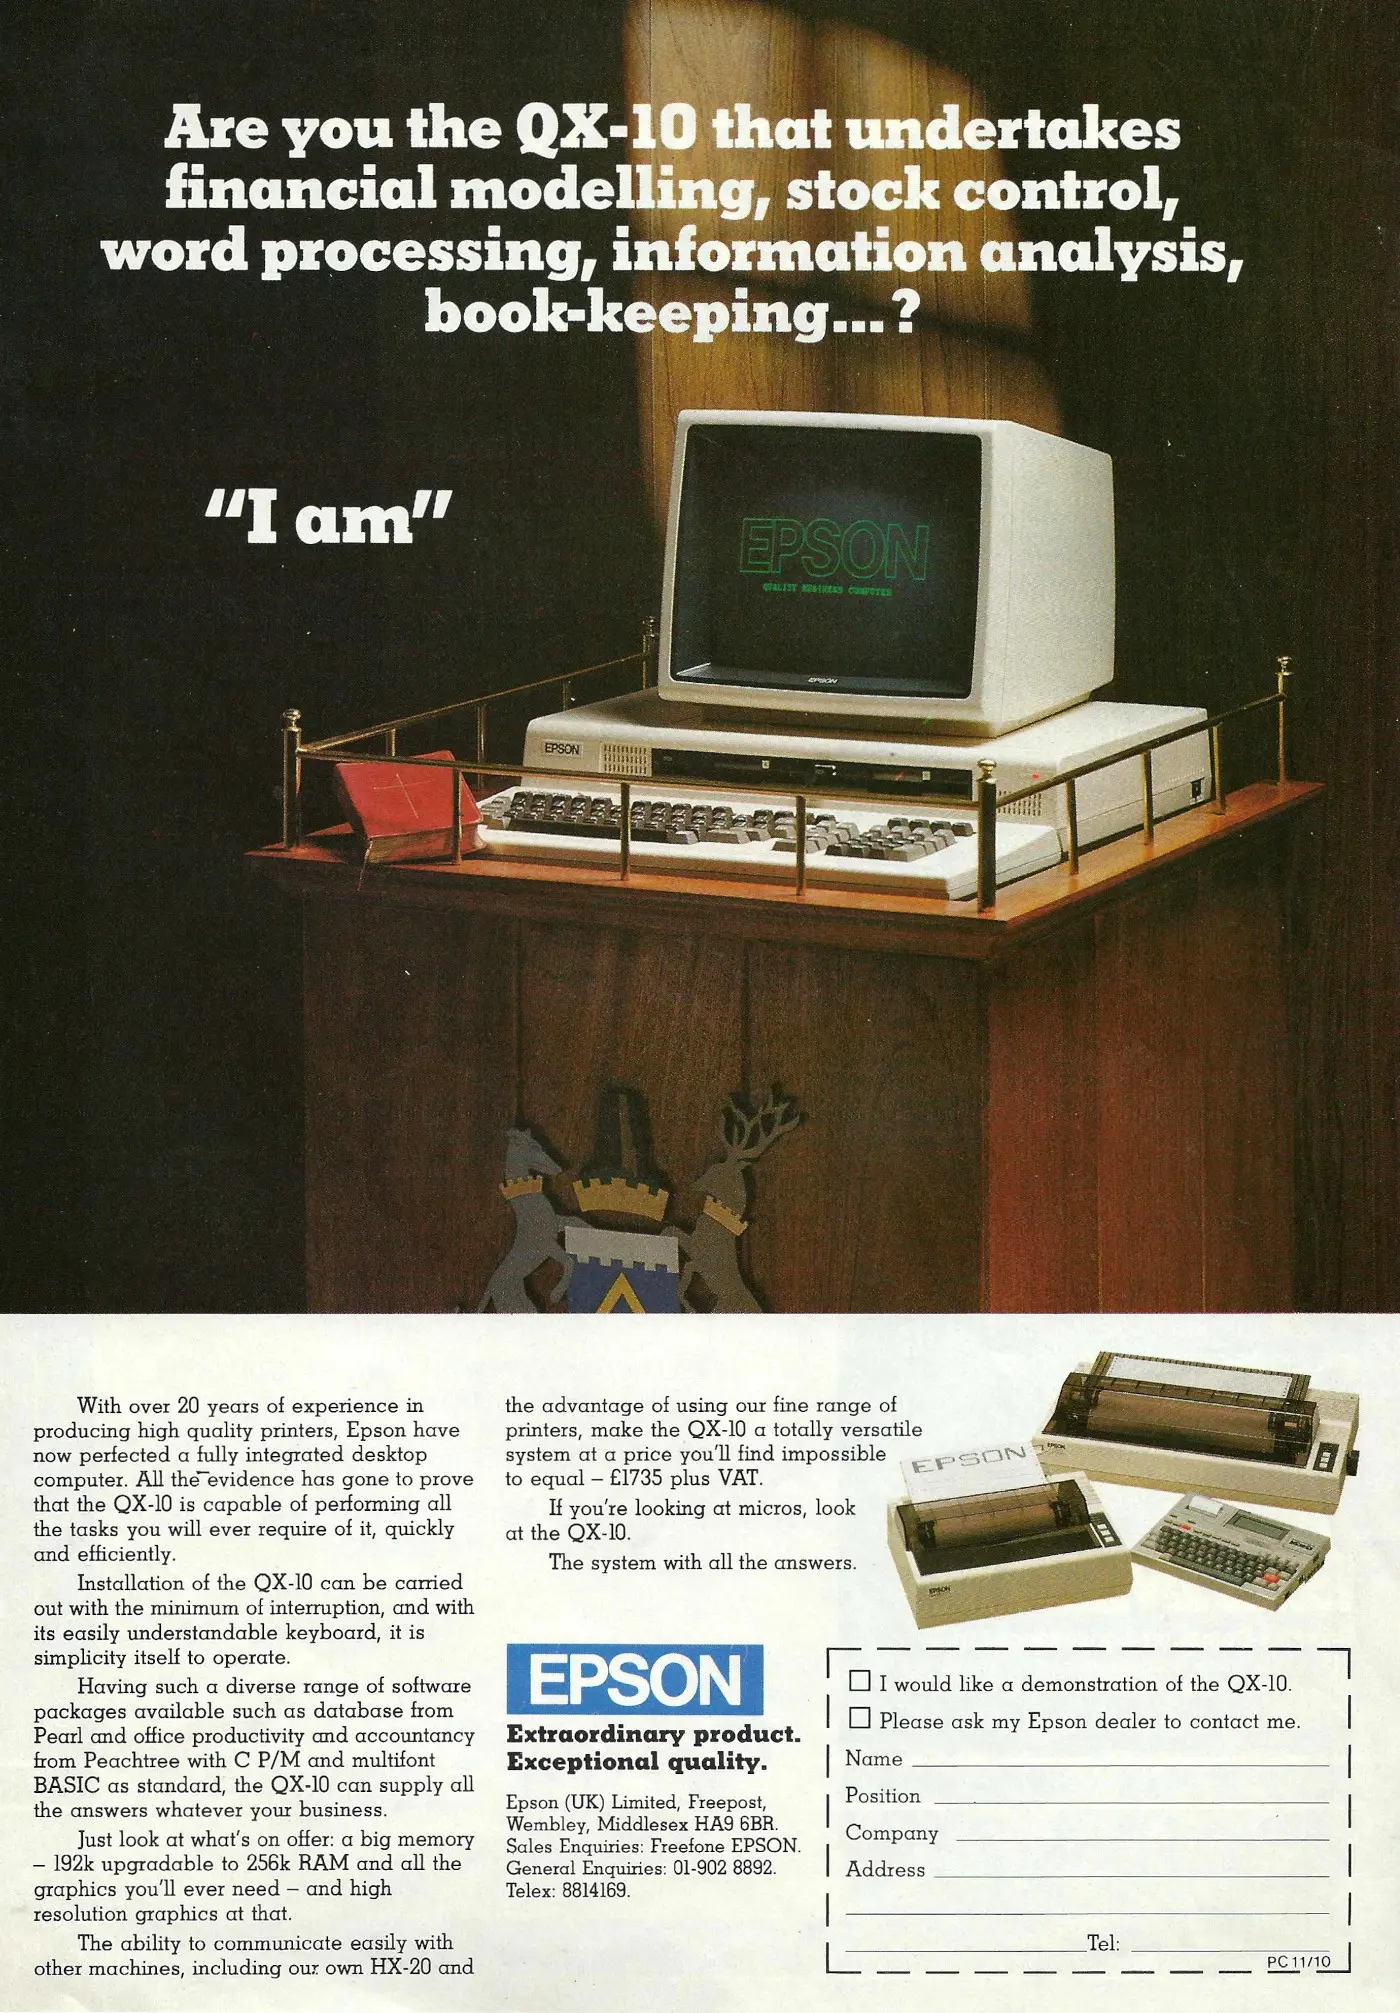 Epson Advert: <b>Are you the QX-10 that undertakes financial modelling, stock control, book-keeping...?</b>, from Computing Today, May 1983